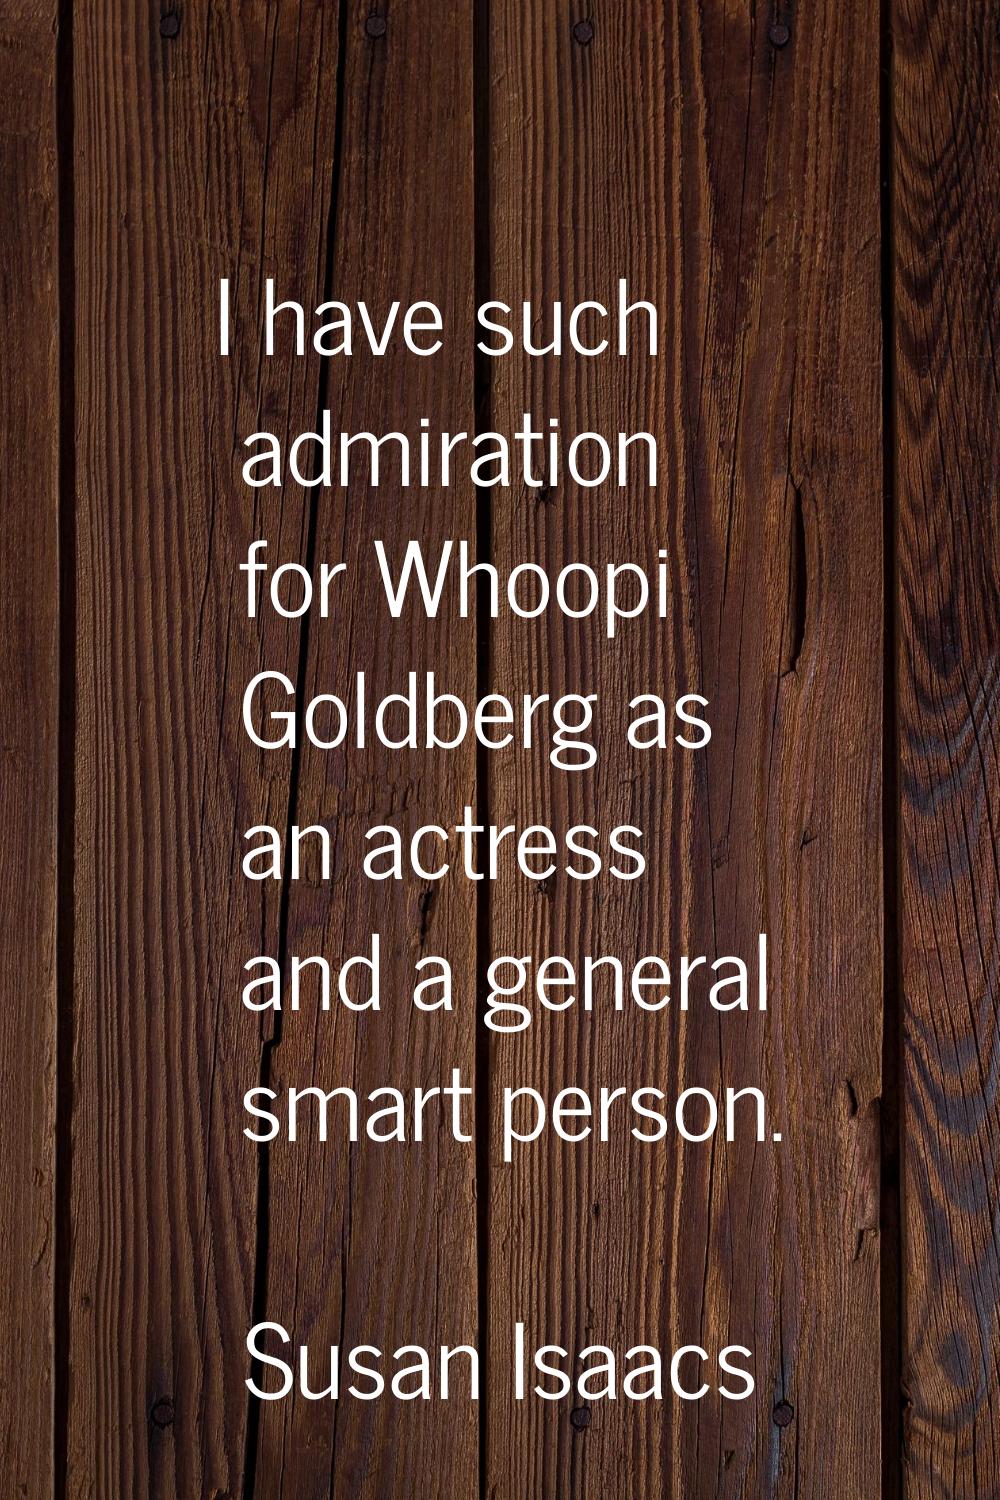 I have such admiration for Whoopi Goldberg as an actress and a general smart person.